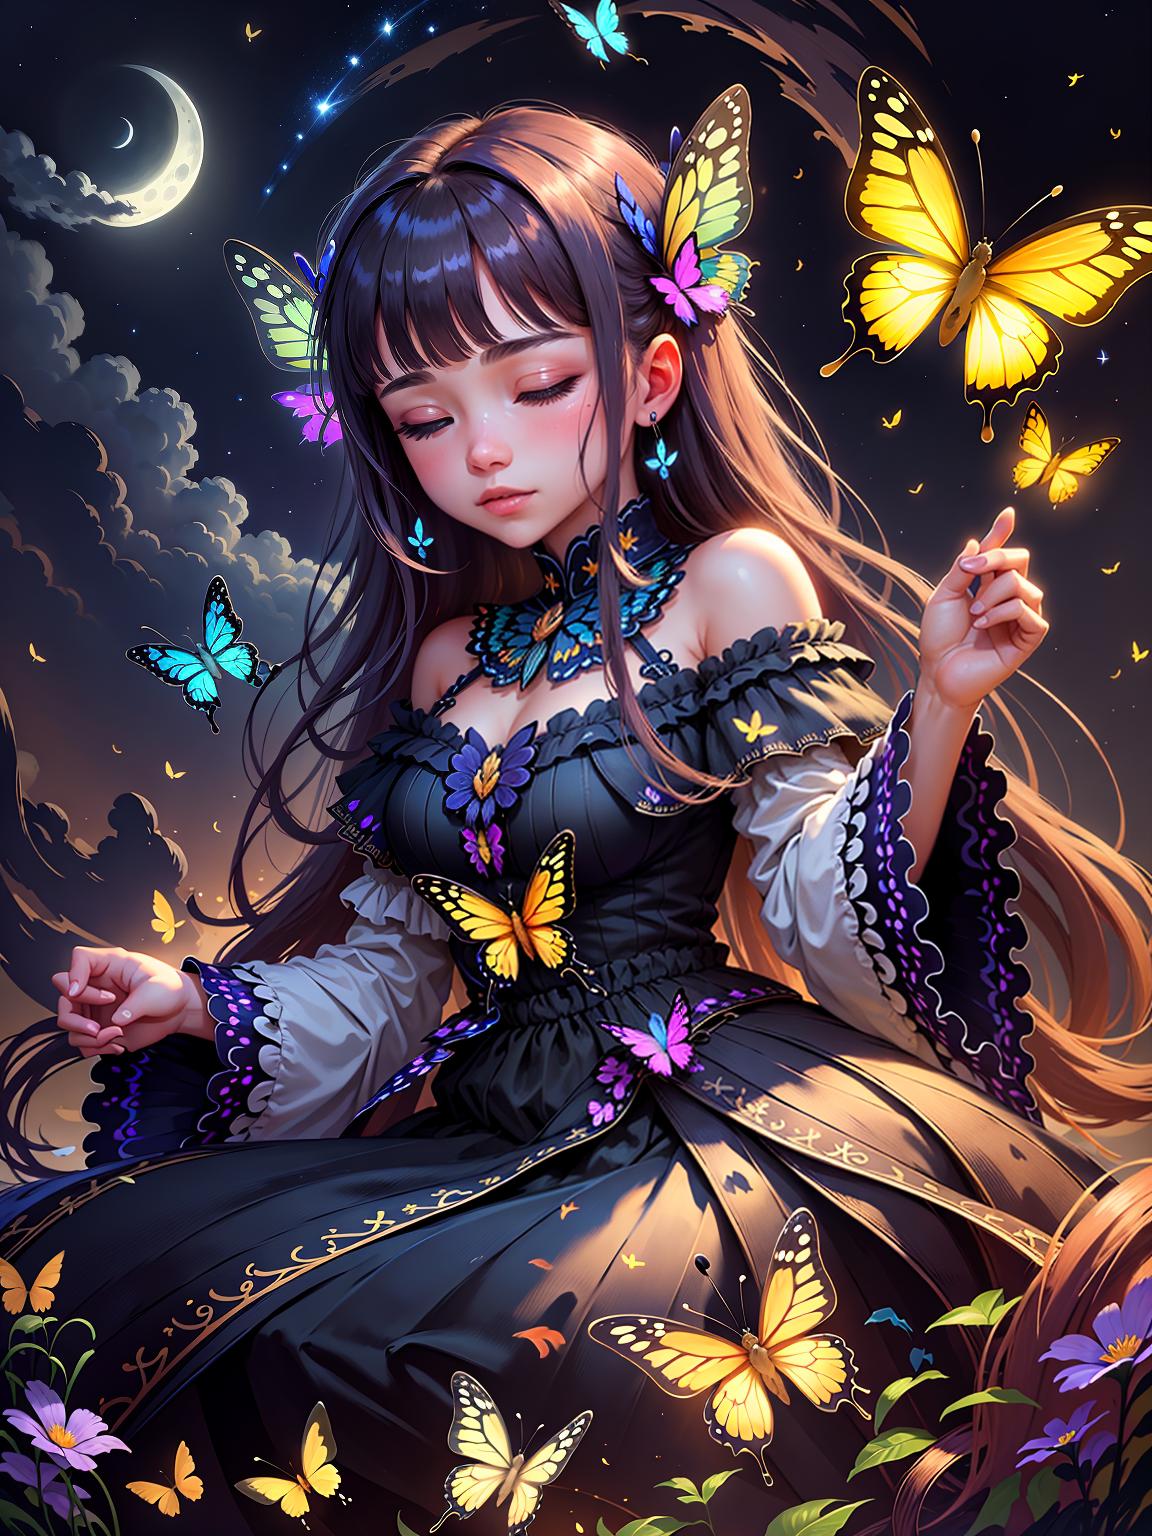  master piece, best quality, ultra detailed, highres, 4k.8k, Dreamweaving Butterfly, Weaving beautiful dreams, Serene, BREAK Dreamweaving Butterfly, Night sky, Stars, moonlight, clouds, BREAK Calming and peaceful, Illuminated by moonlight, dreamlike quality, fun00d